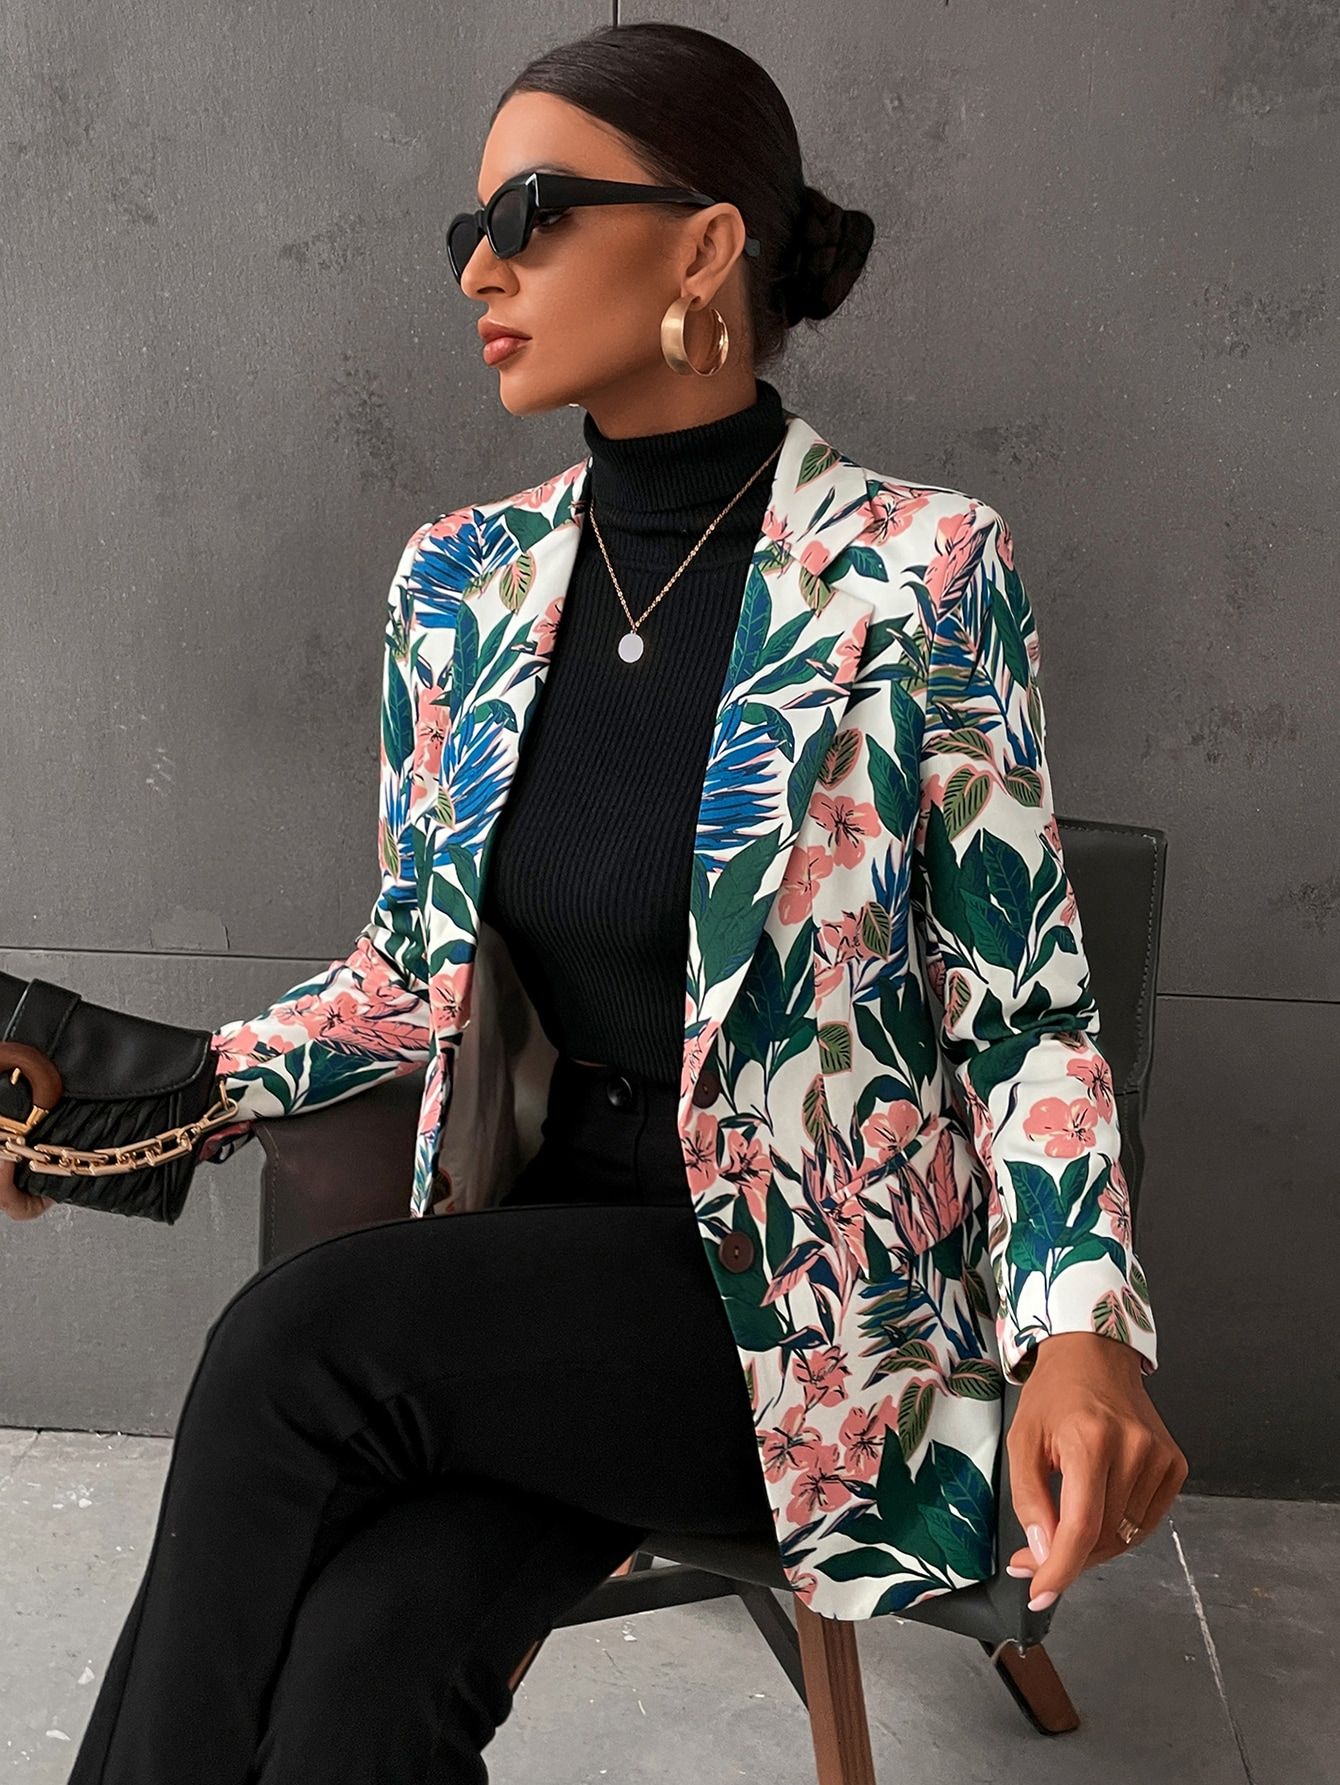 Floral Blazers: Adding a Feminine Touch to Your Formal Attire